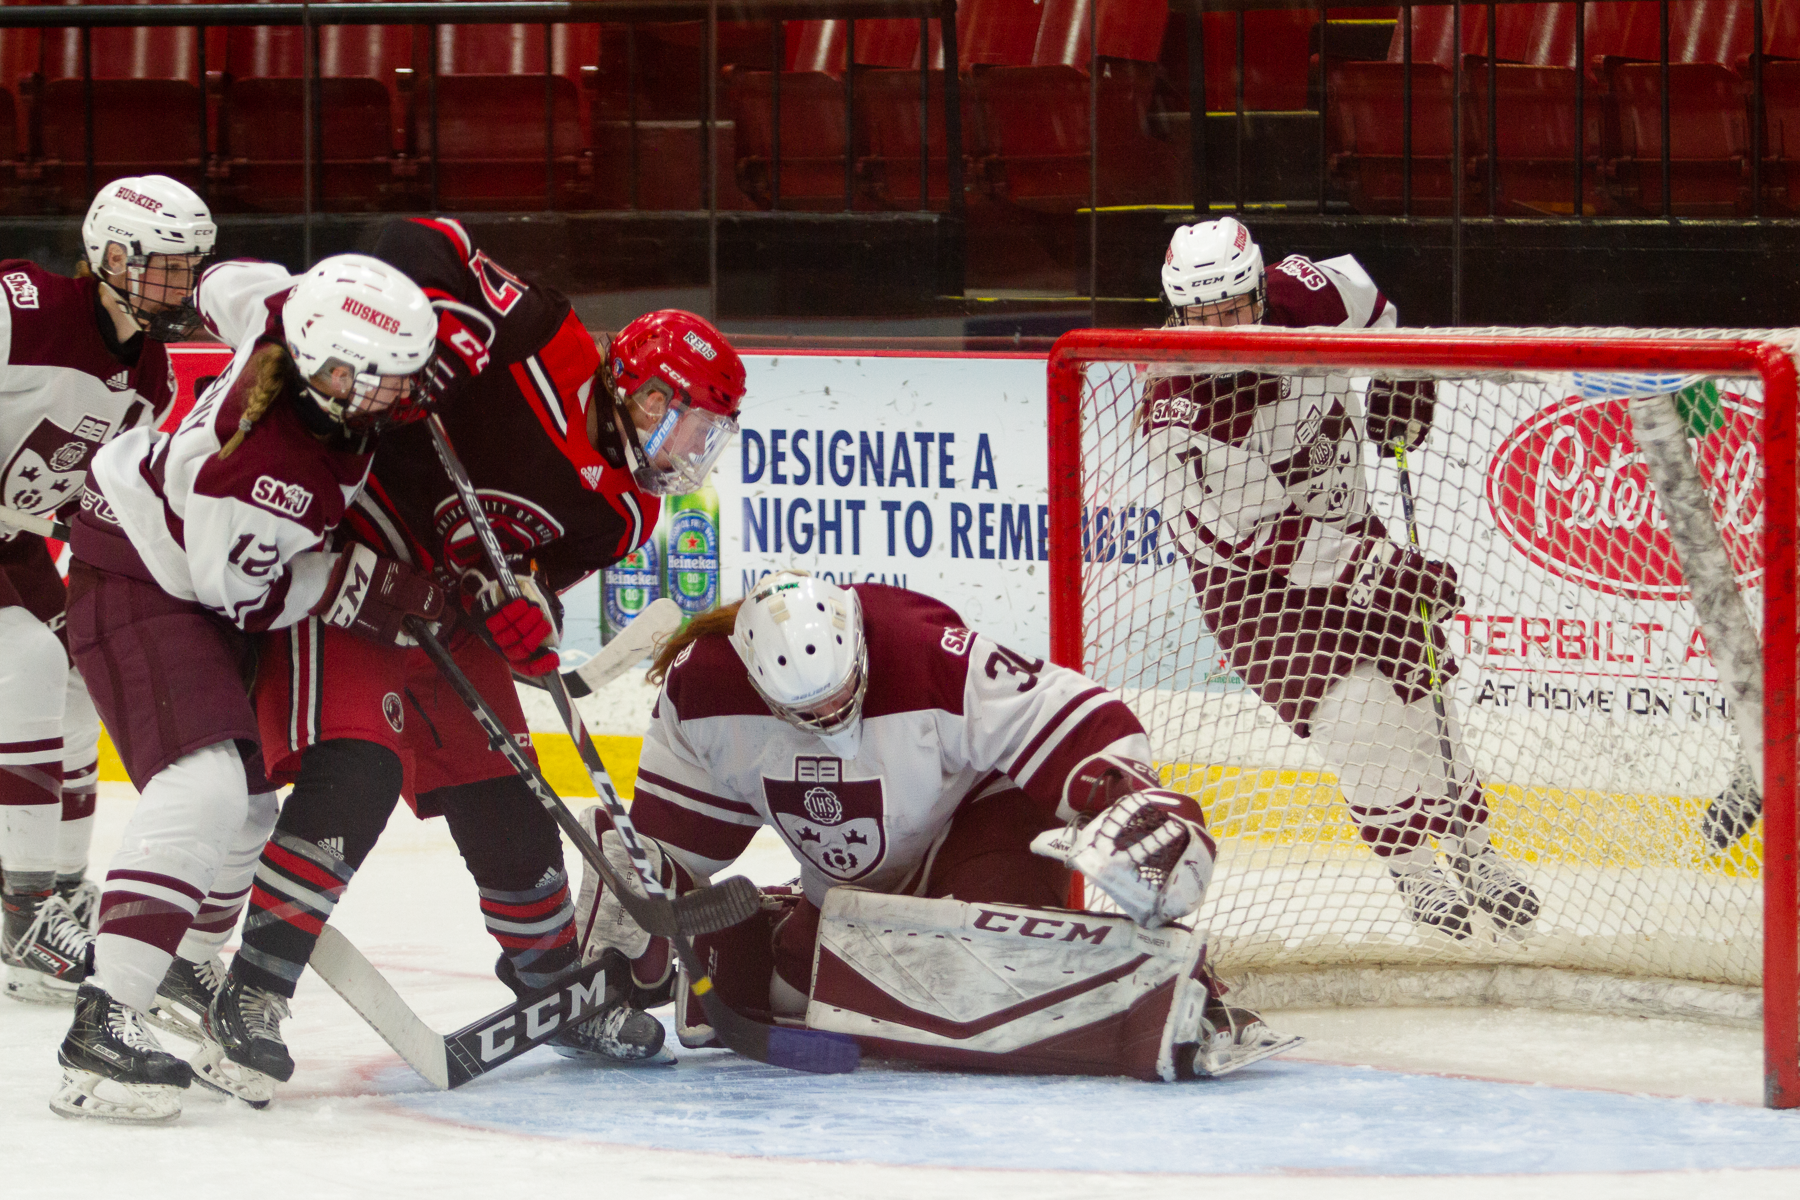 Huskies goaltender Dagny Hudspeth makes a save in the Huskies 3-0 loss to the UNB REDS on March 6, 2022 in Fredericton. (Photo by Jeff Crawford / UNB Athletics)